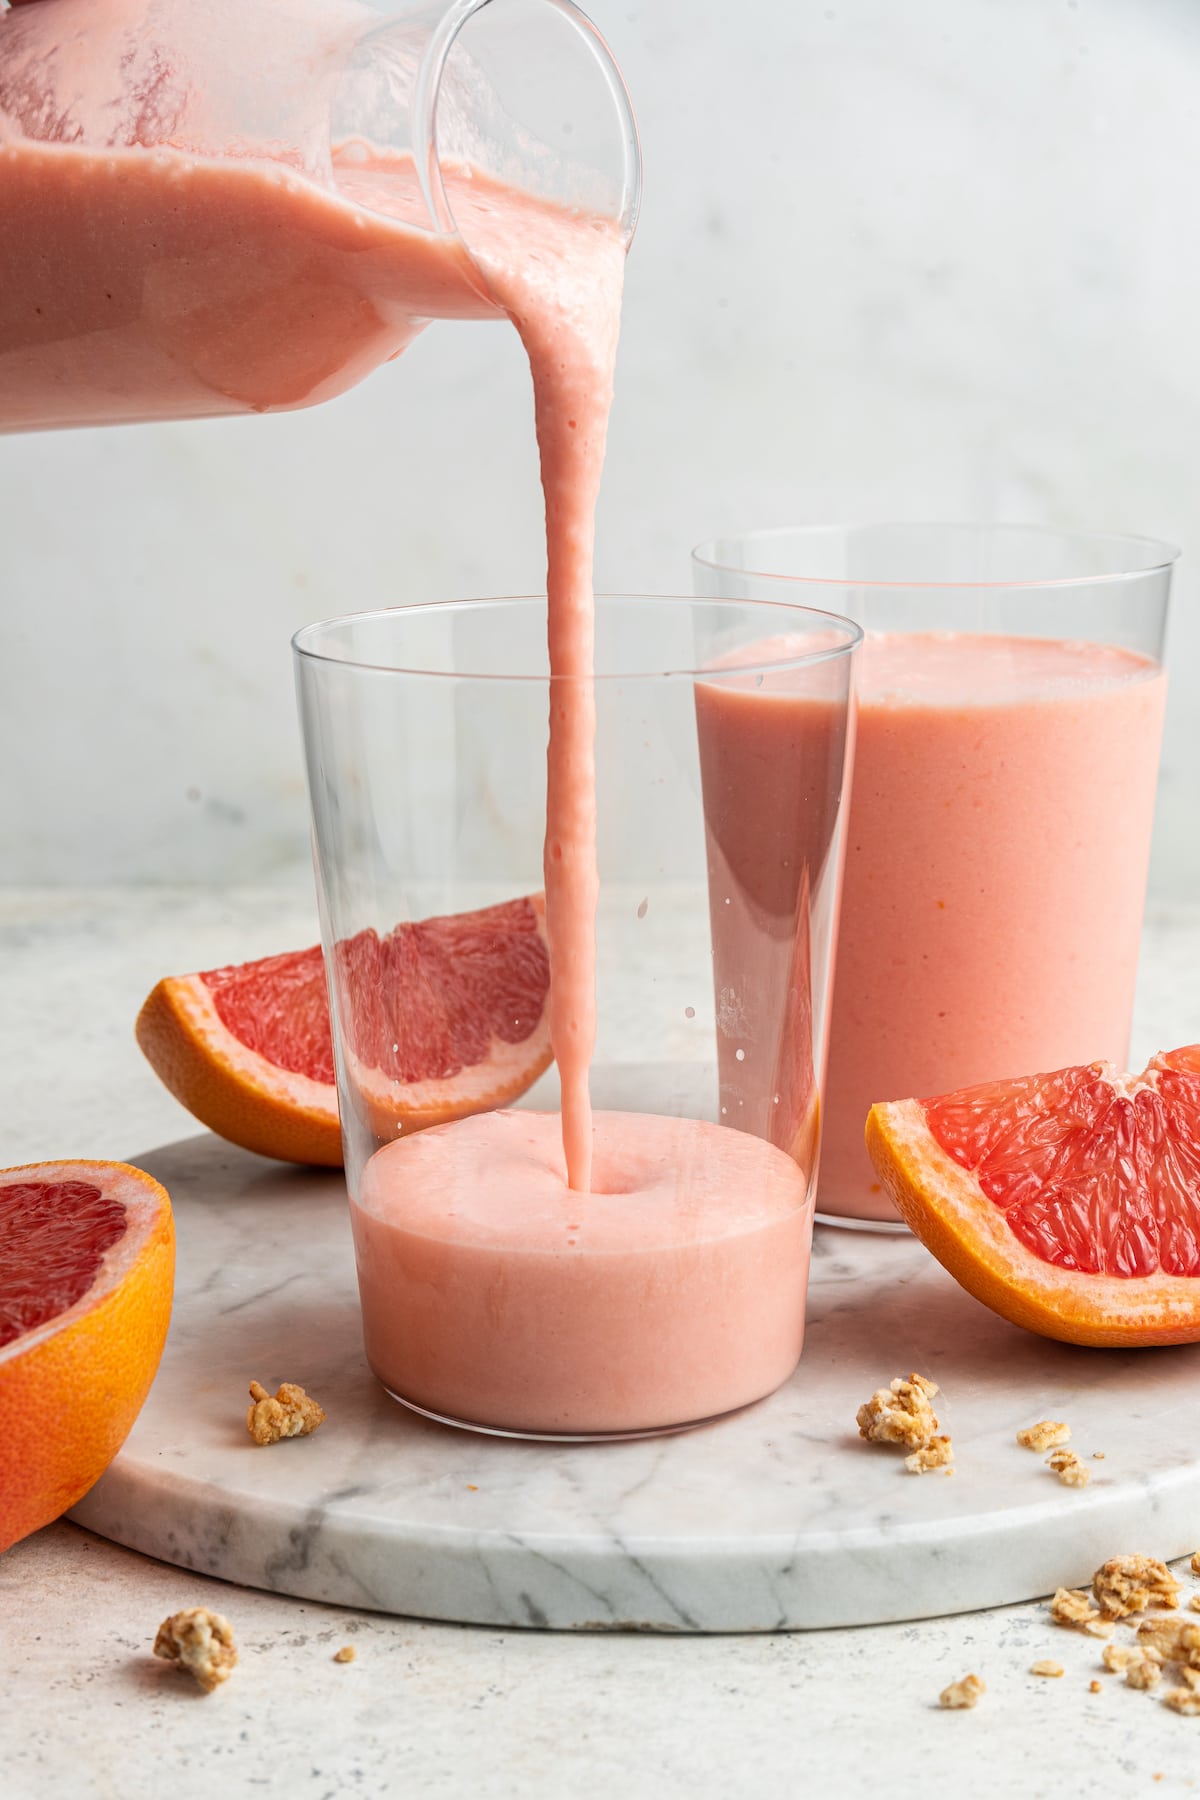 Grapefruit smoothie being poured into glass.